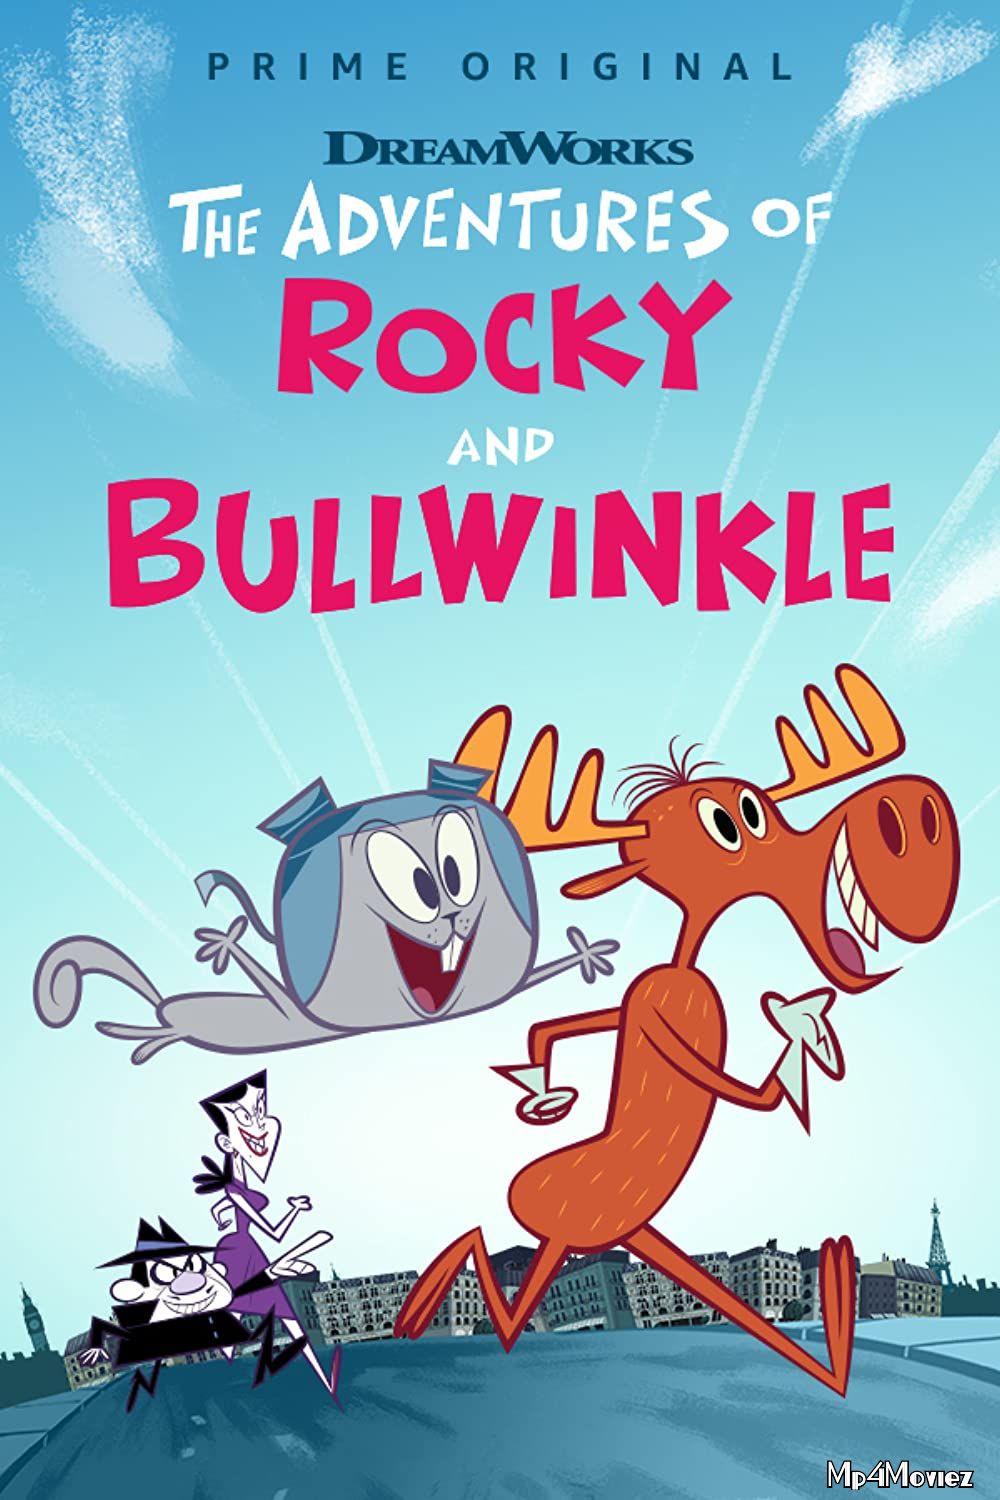 The Adventures of Rocky and Bullwinkle 2018 Hindi Dubbed Movie download full movie